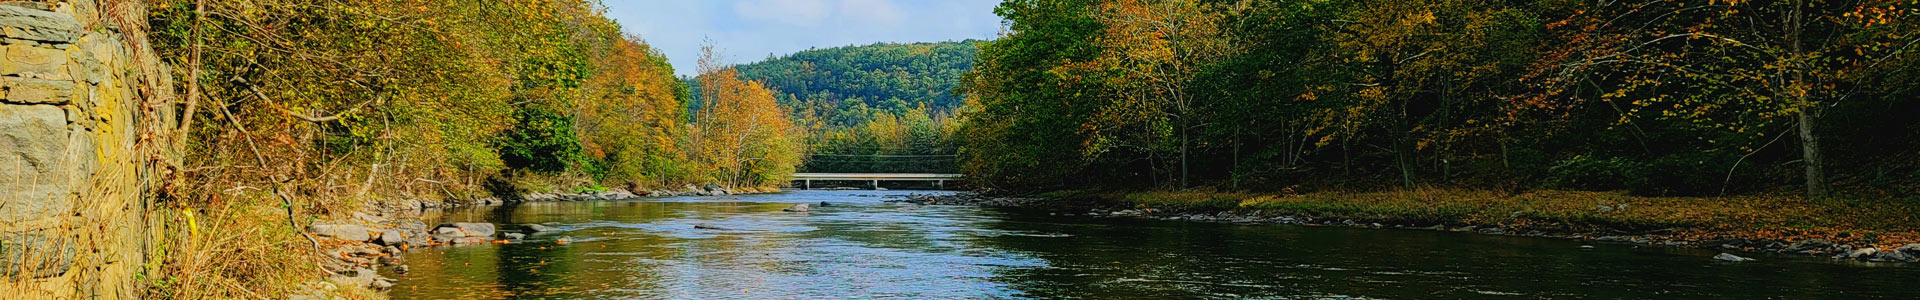 A river with fall foliage and a bridge in the background